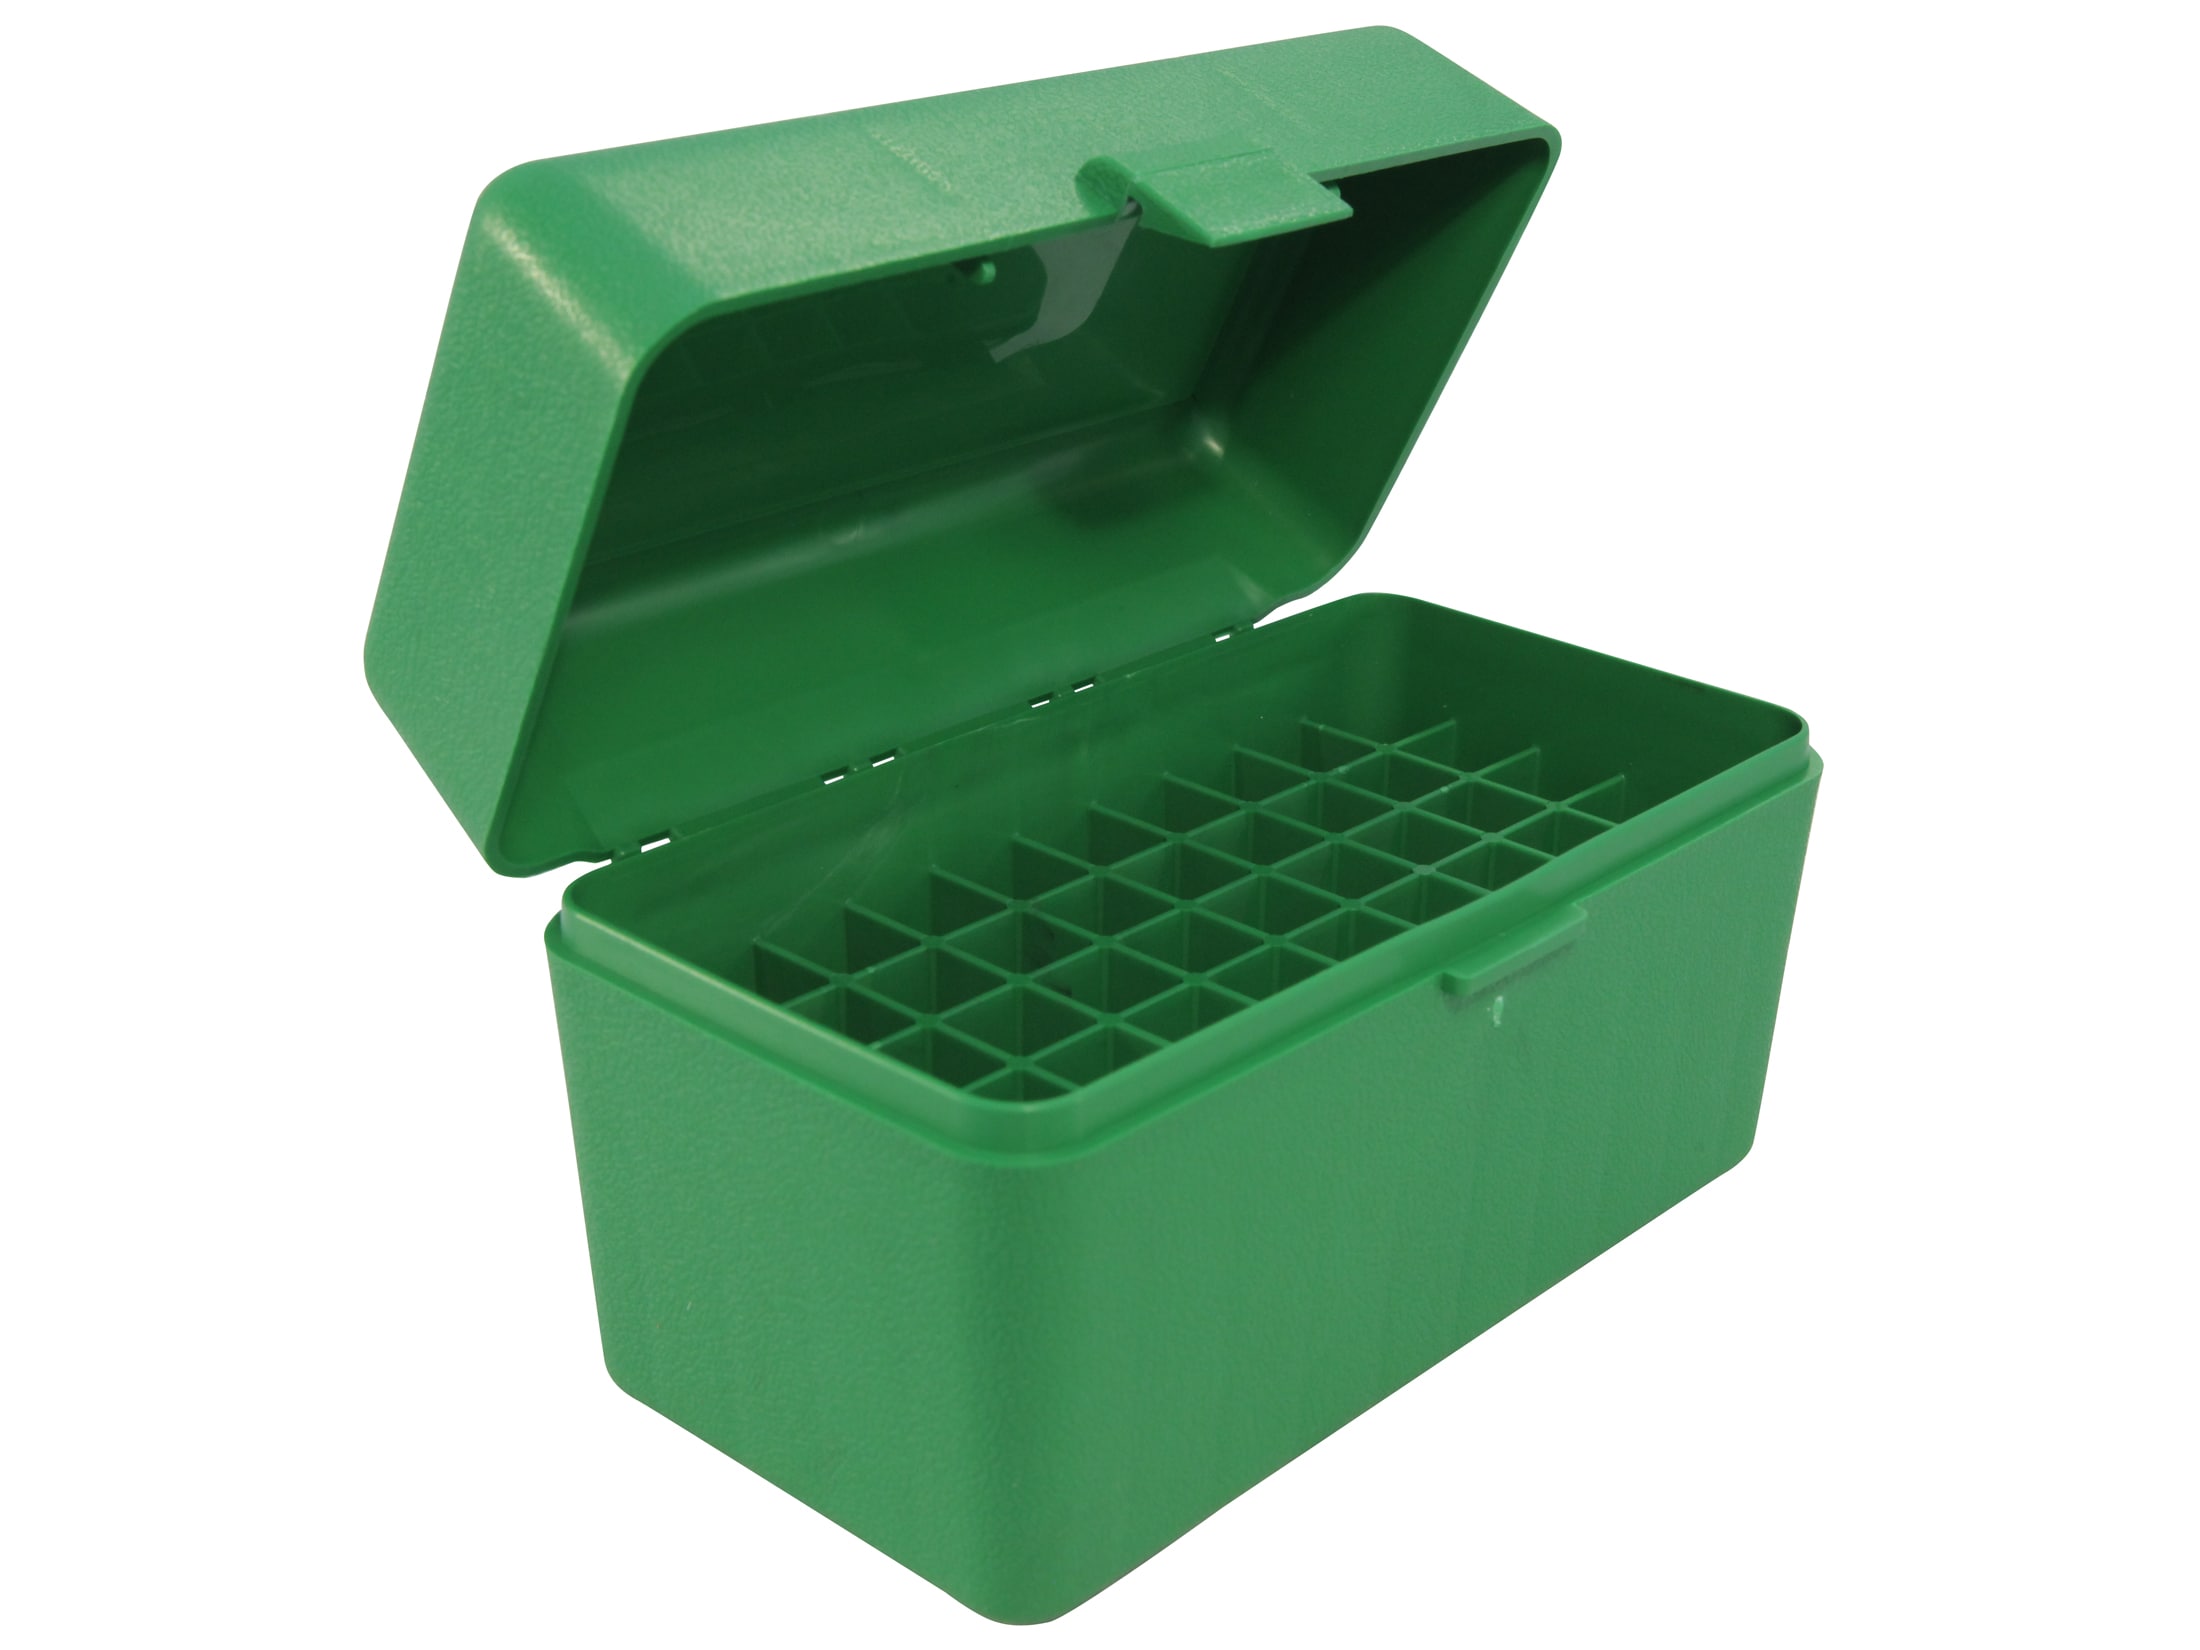 30-06 270 LR-50 Large Rifle 6 pack of 50 round plastic ammo boxes 25-06 